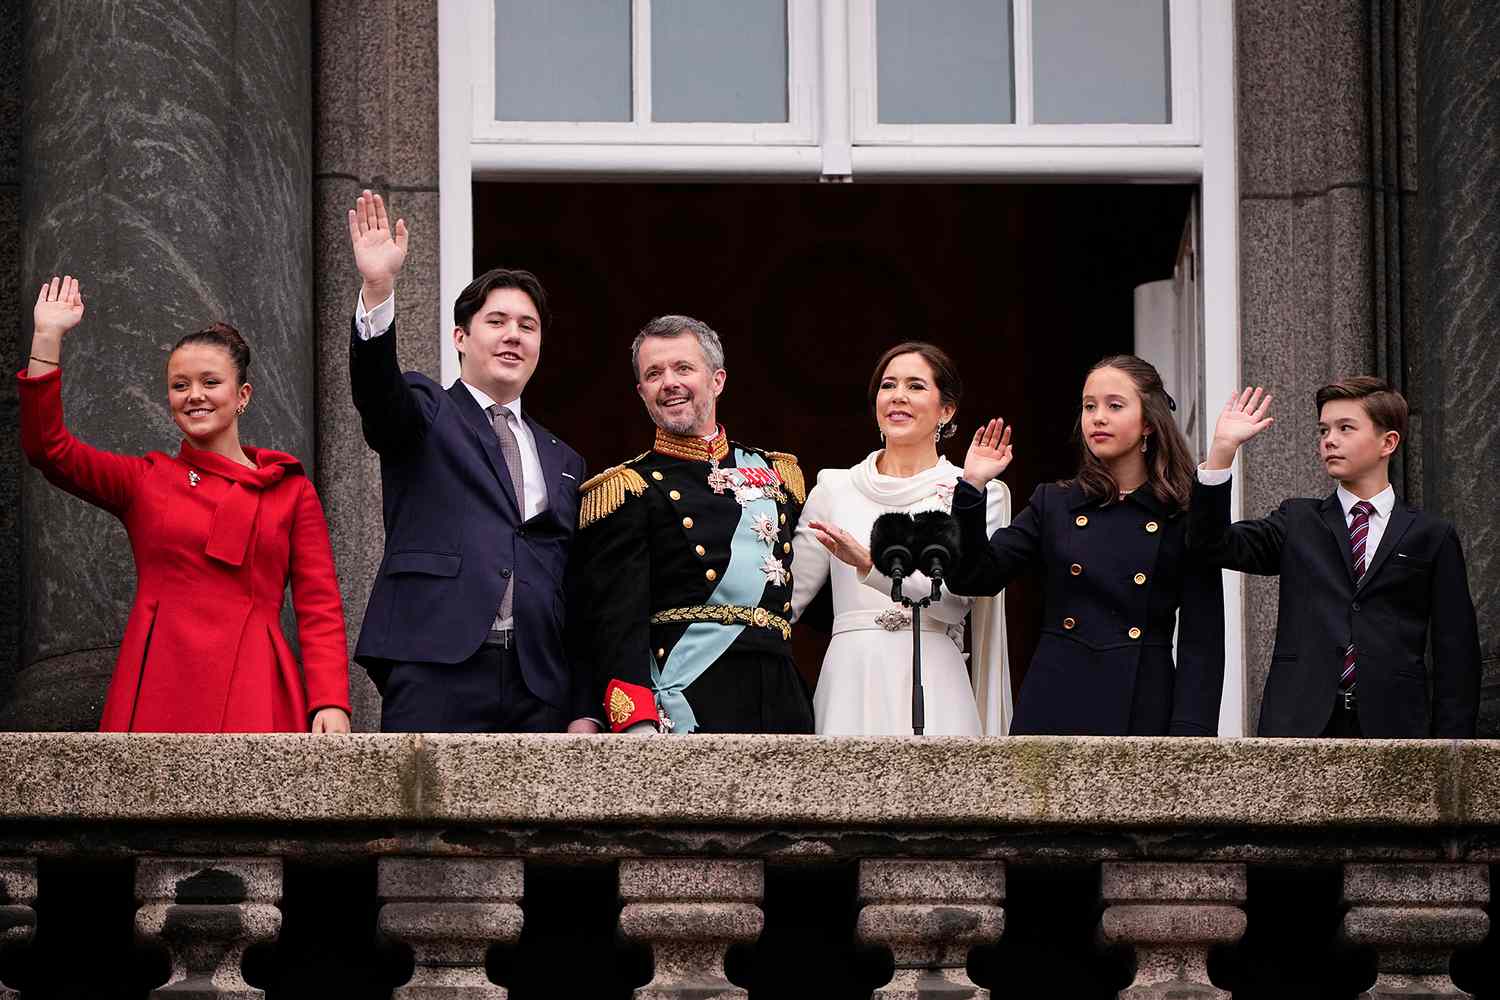 Princess Isabella of Denmark, Prince Christian of Denmark, King Frederik X of Denmark, Queen Mary of Denmark, Princess Josephine of Denmark and Prince Vincent of Denmark wave to the crowd after a declaration of the King's accession to the throne, from the balcony of Christiansborg Palace in Copenhagen, Denmark